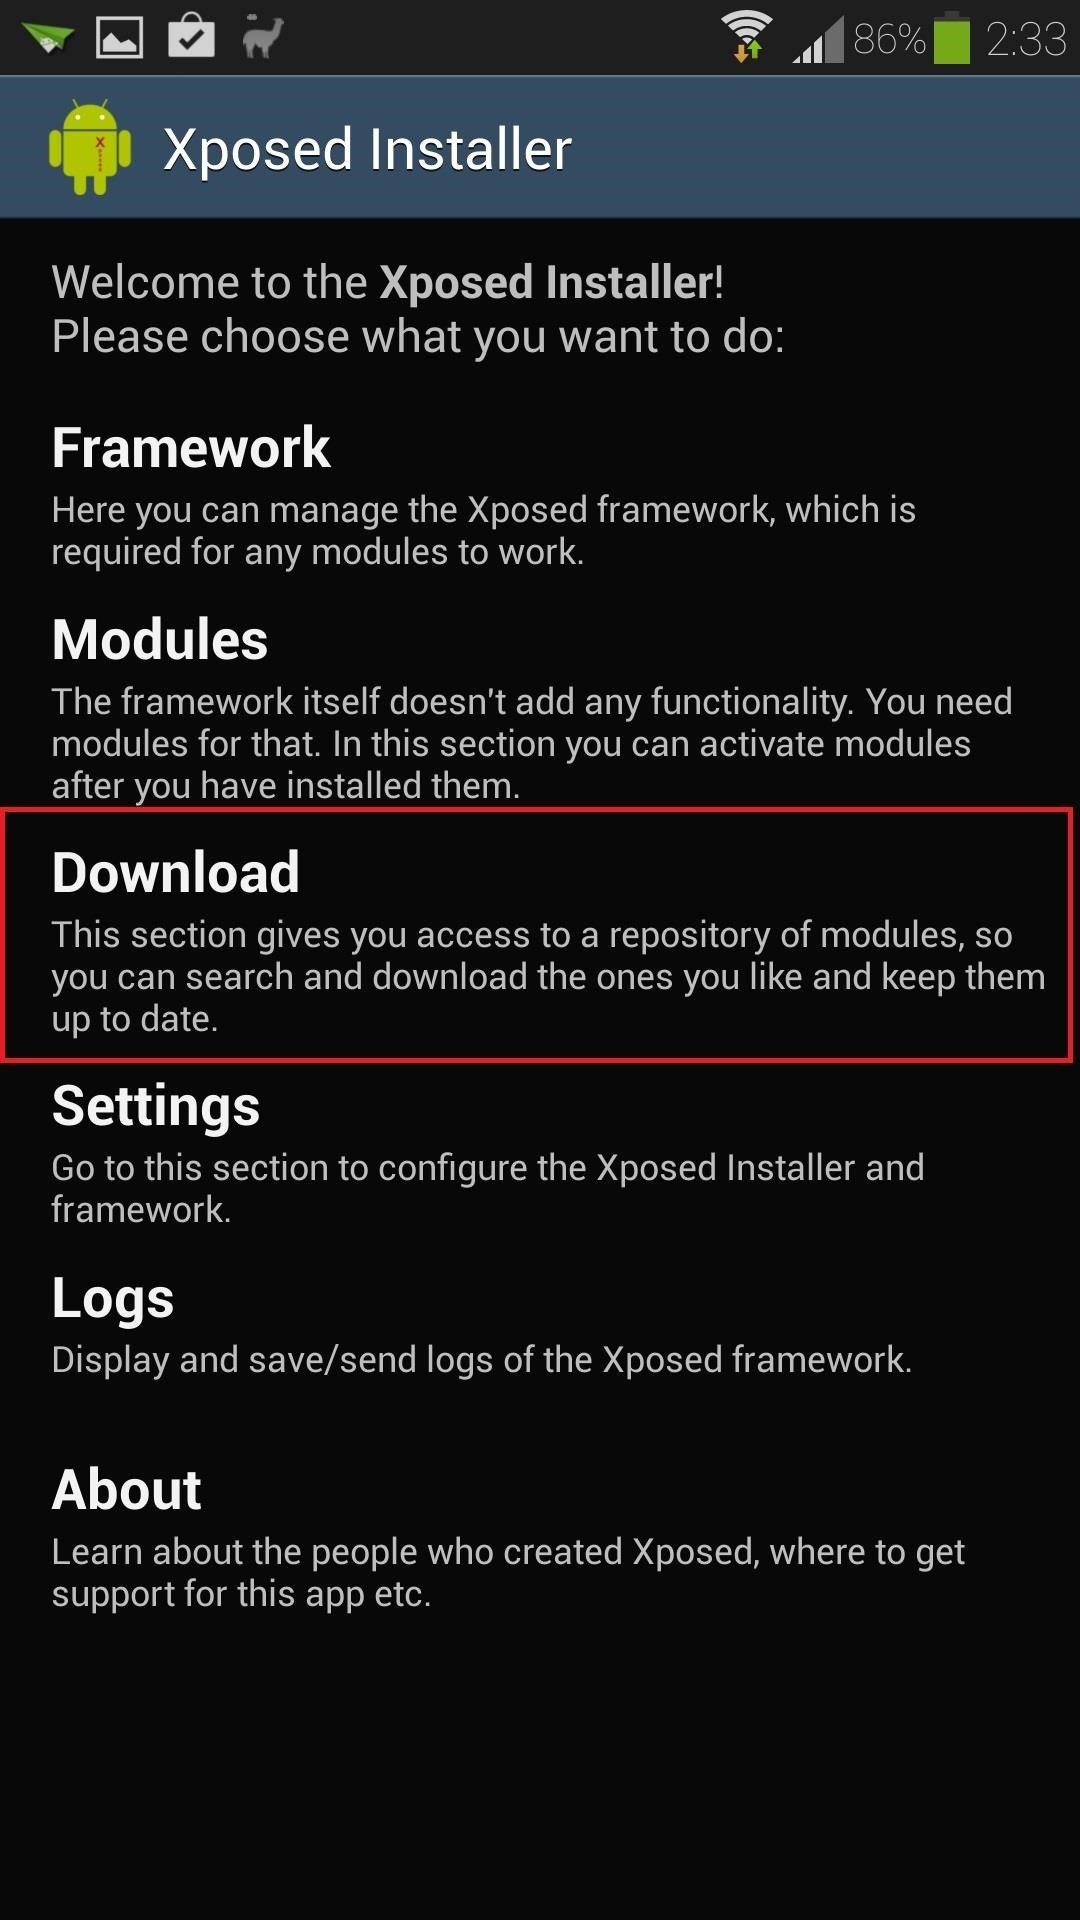 How to Access Your Notifications from the Pattern or PIN-Protected Lock Screen on Your Galaxy S4